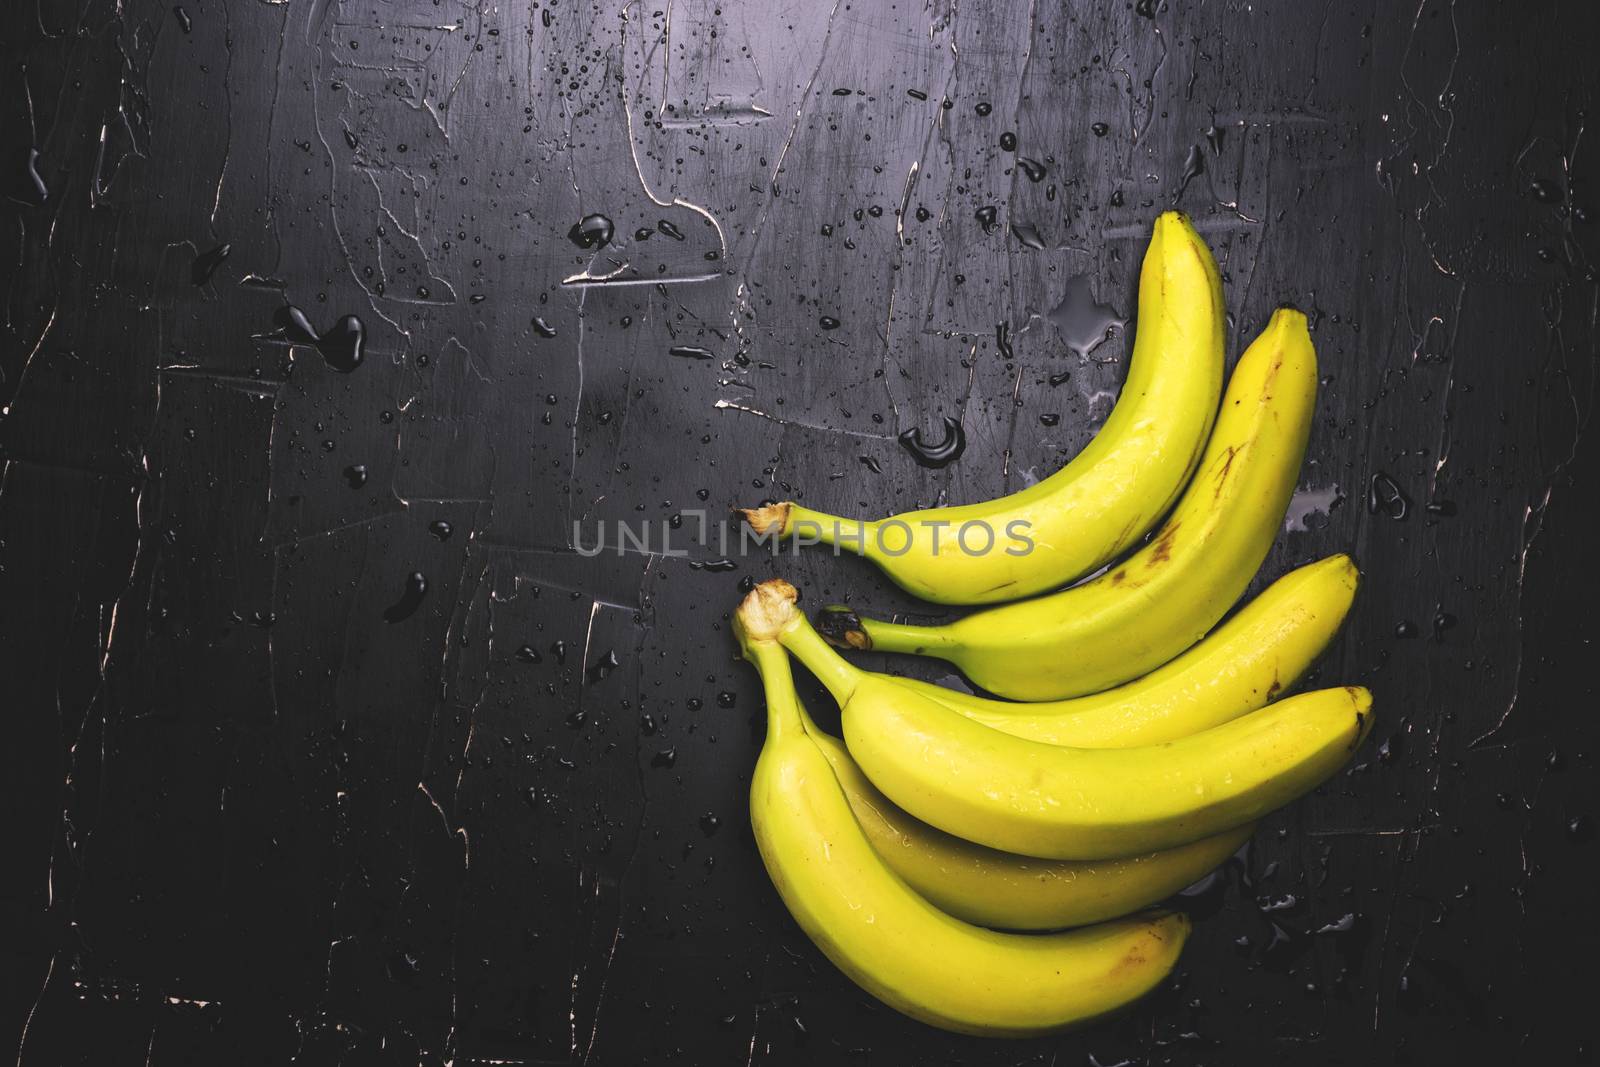 Apples and bananas on a dark background with splashes of water